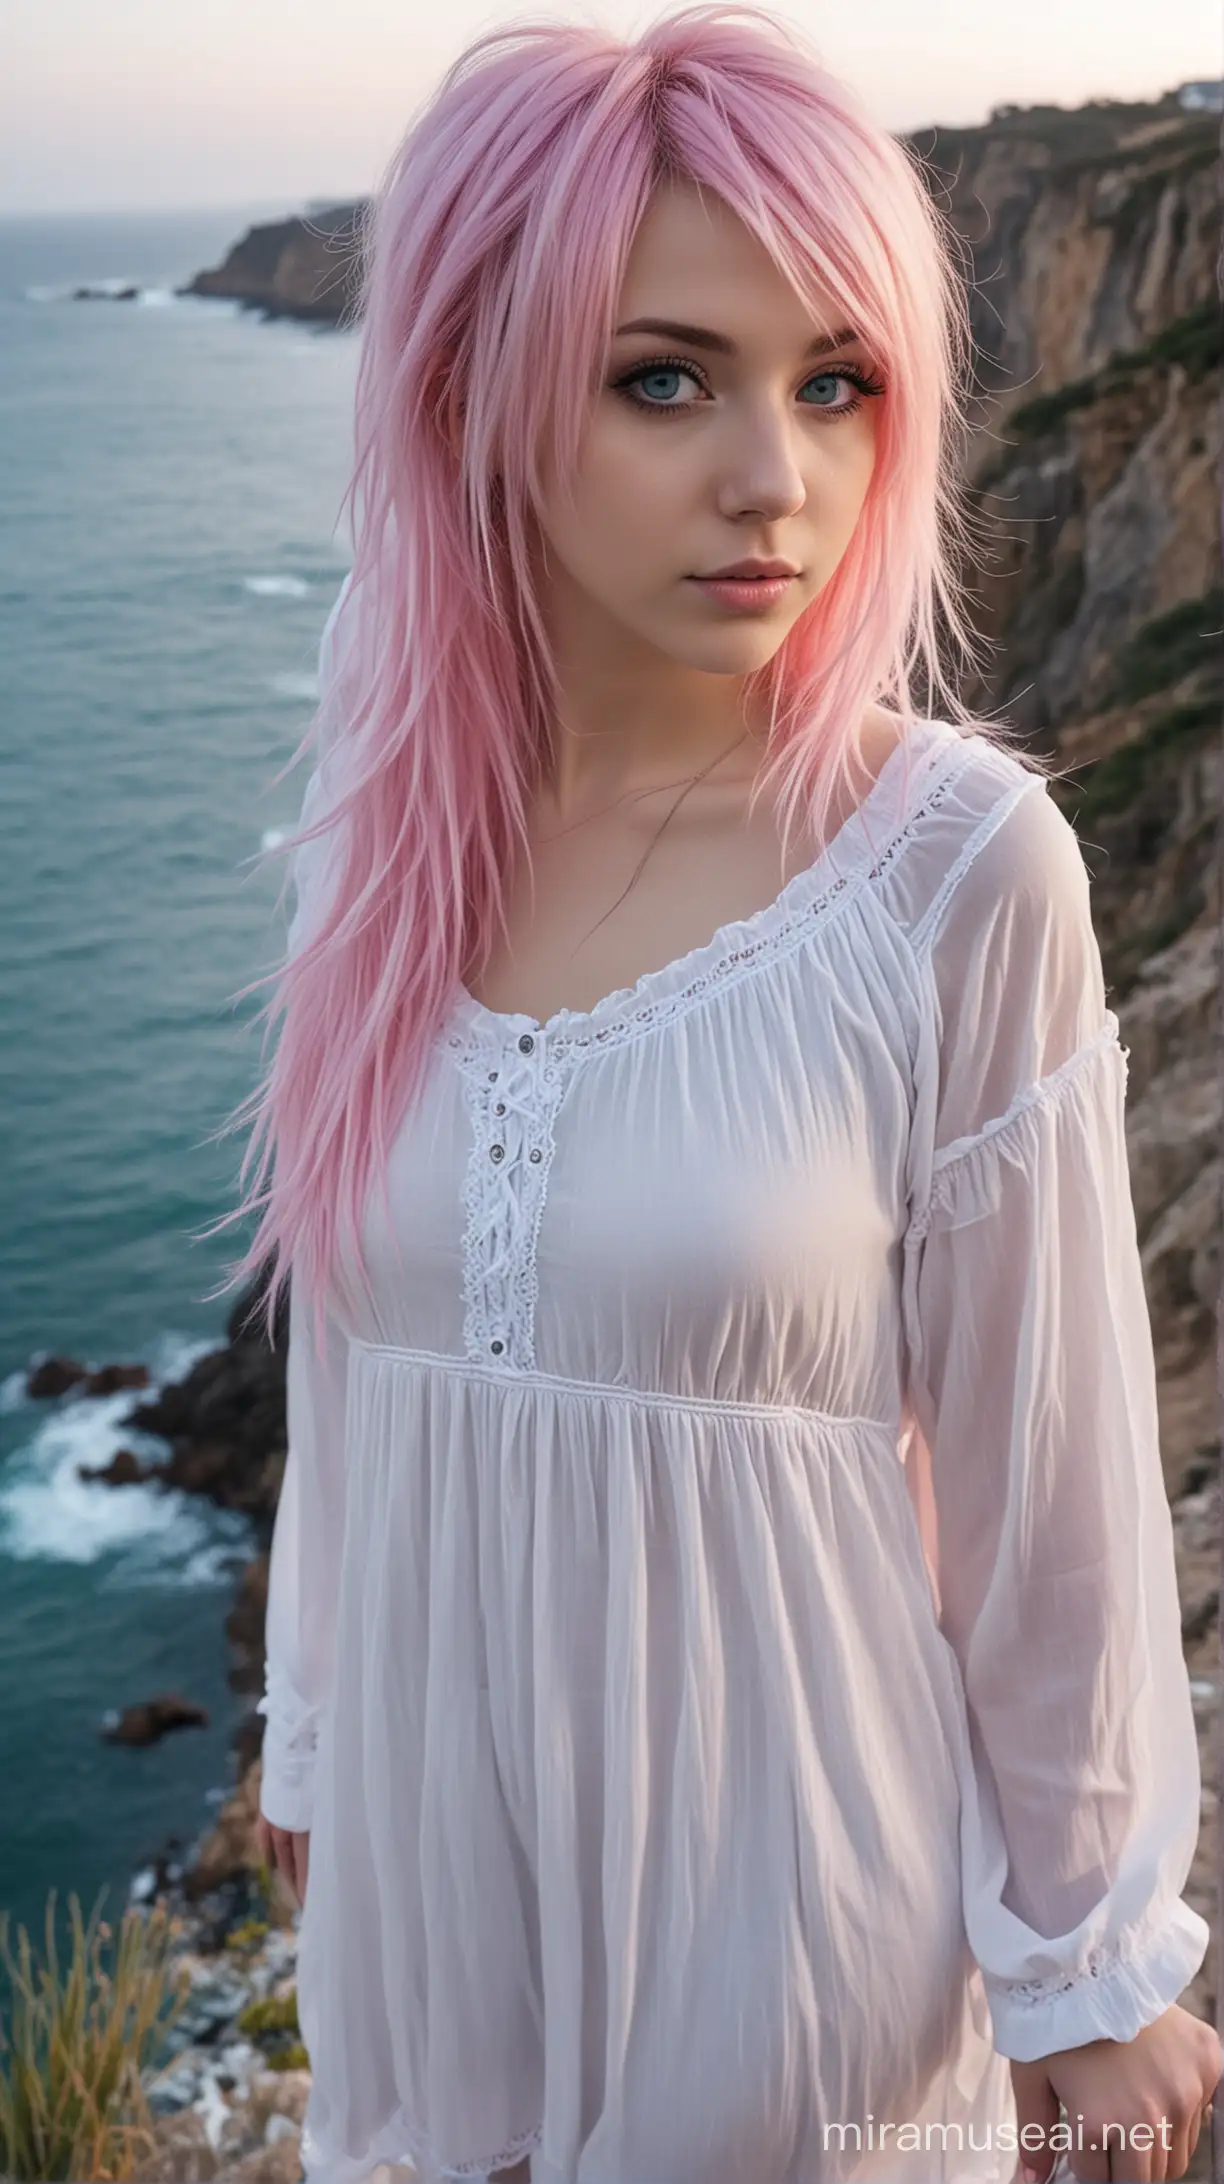 Gorgeous 22YearOld Emo Girl in White Nightdress on Cliff Edge by the Sea